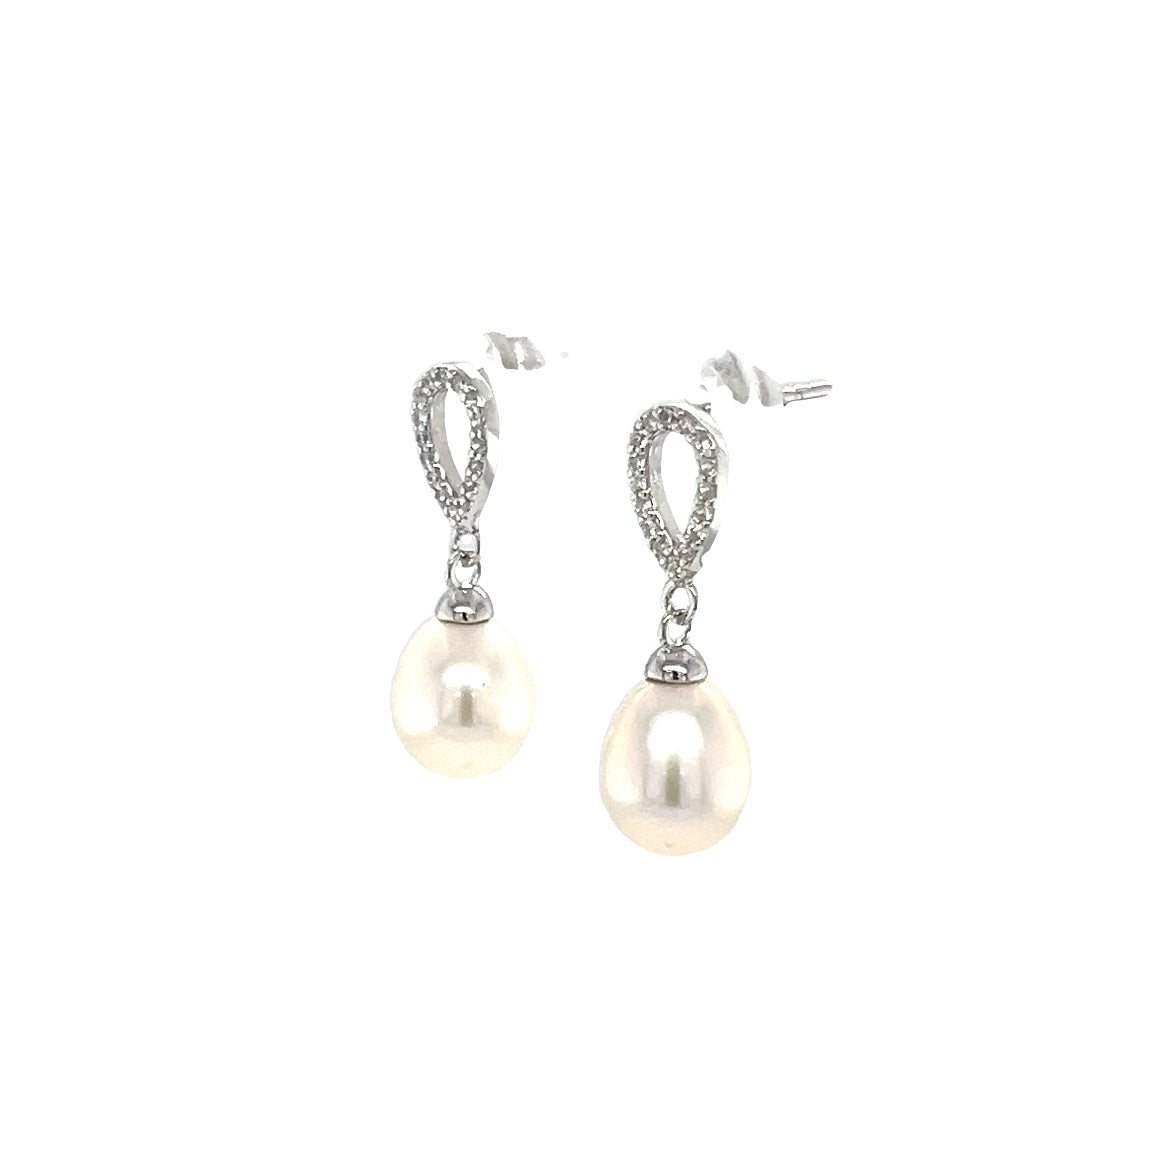 Rice Pearl Dangle Earrings with White Crystals and Sterling Silver Right Side View